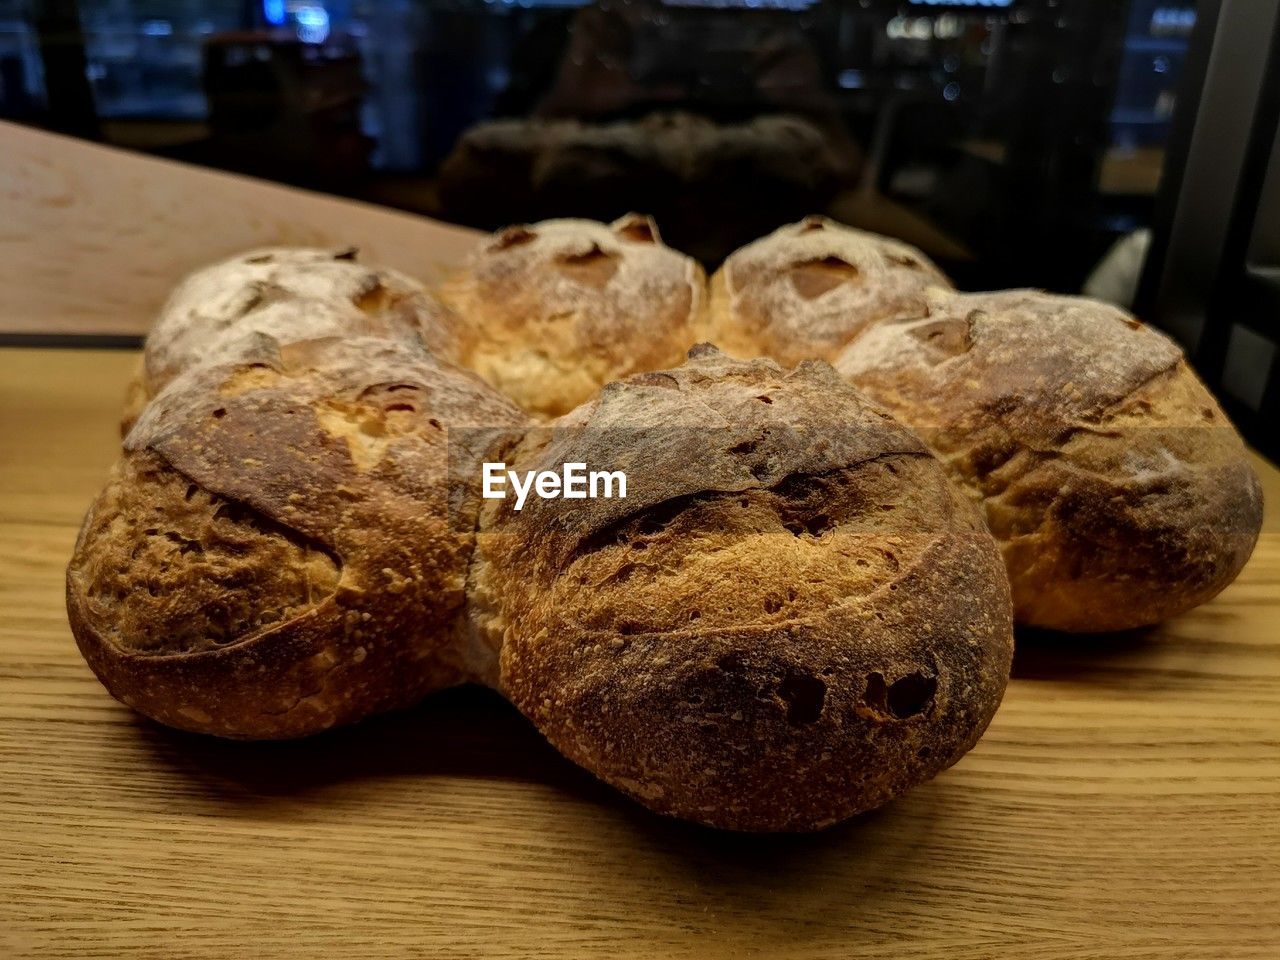 food and drink, freshness, food, bread, indoors, loaf of bread, wellbeing, store, table, close-up, healthy eating, rye bread, baked, wood, bakery, no people, sourdough, focus on foreground, brown, still life